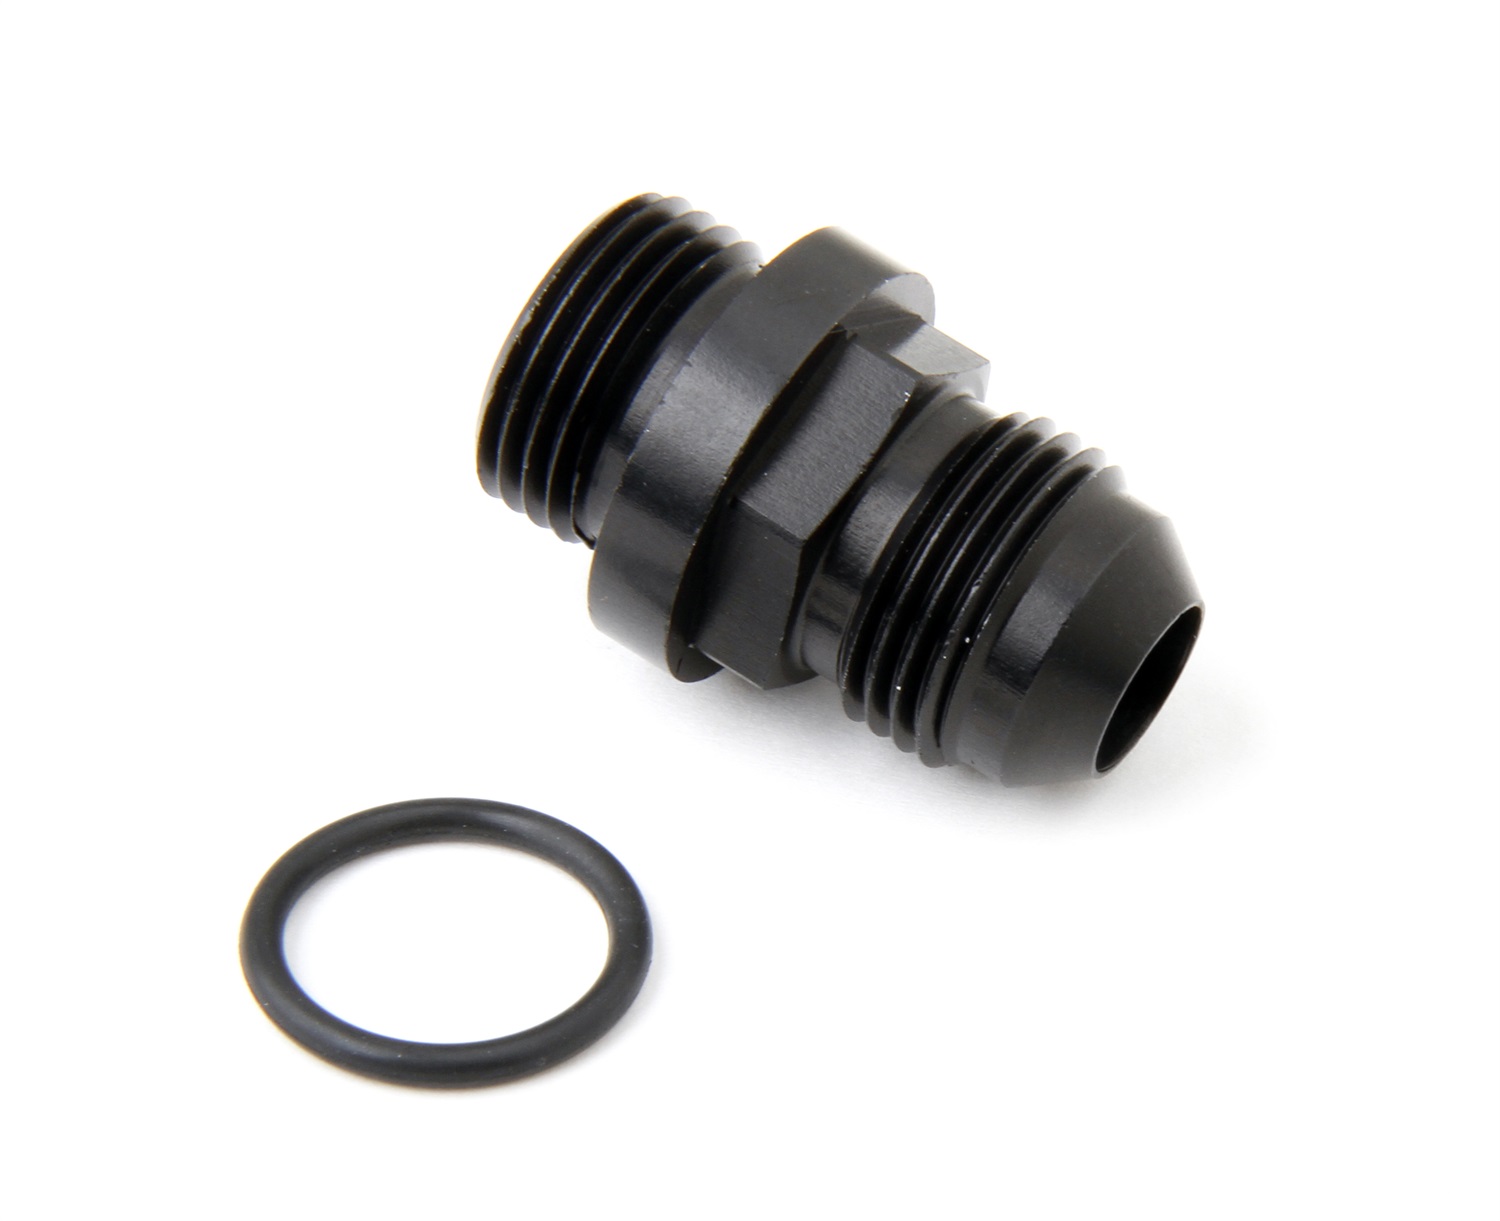 Holley Performance Holley Performance 26-143-1 Fuel Inlet Fitting